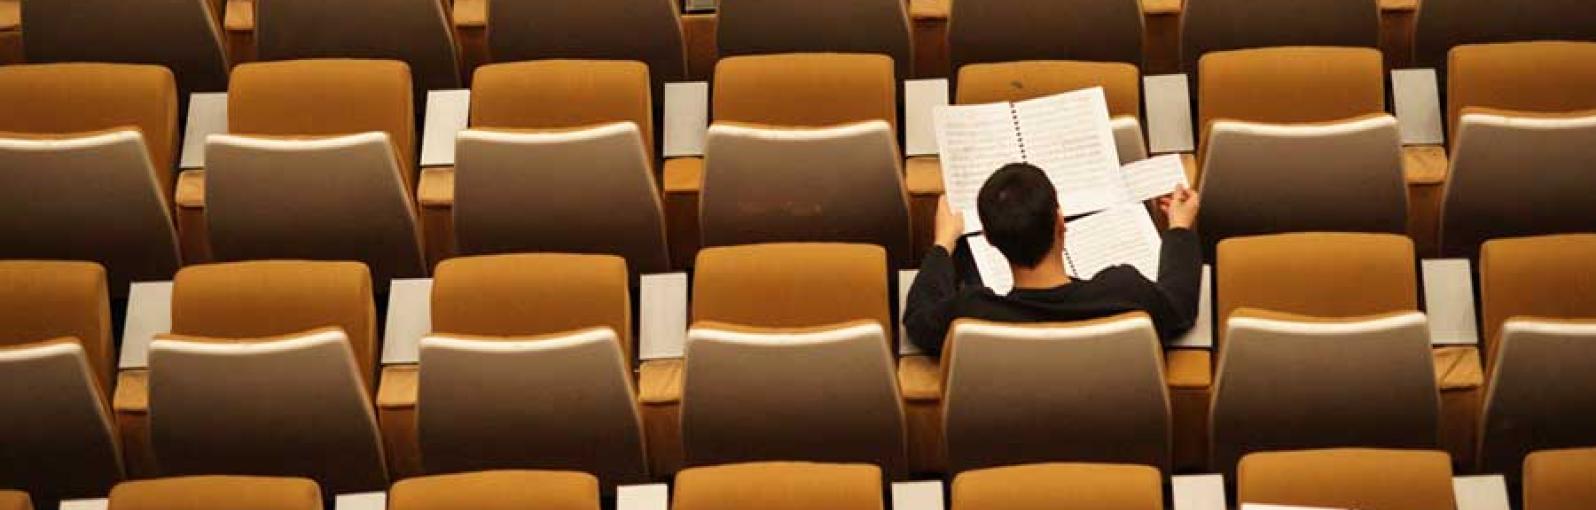 A person works in a lecture theatre